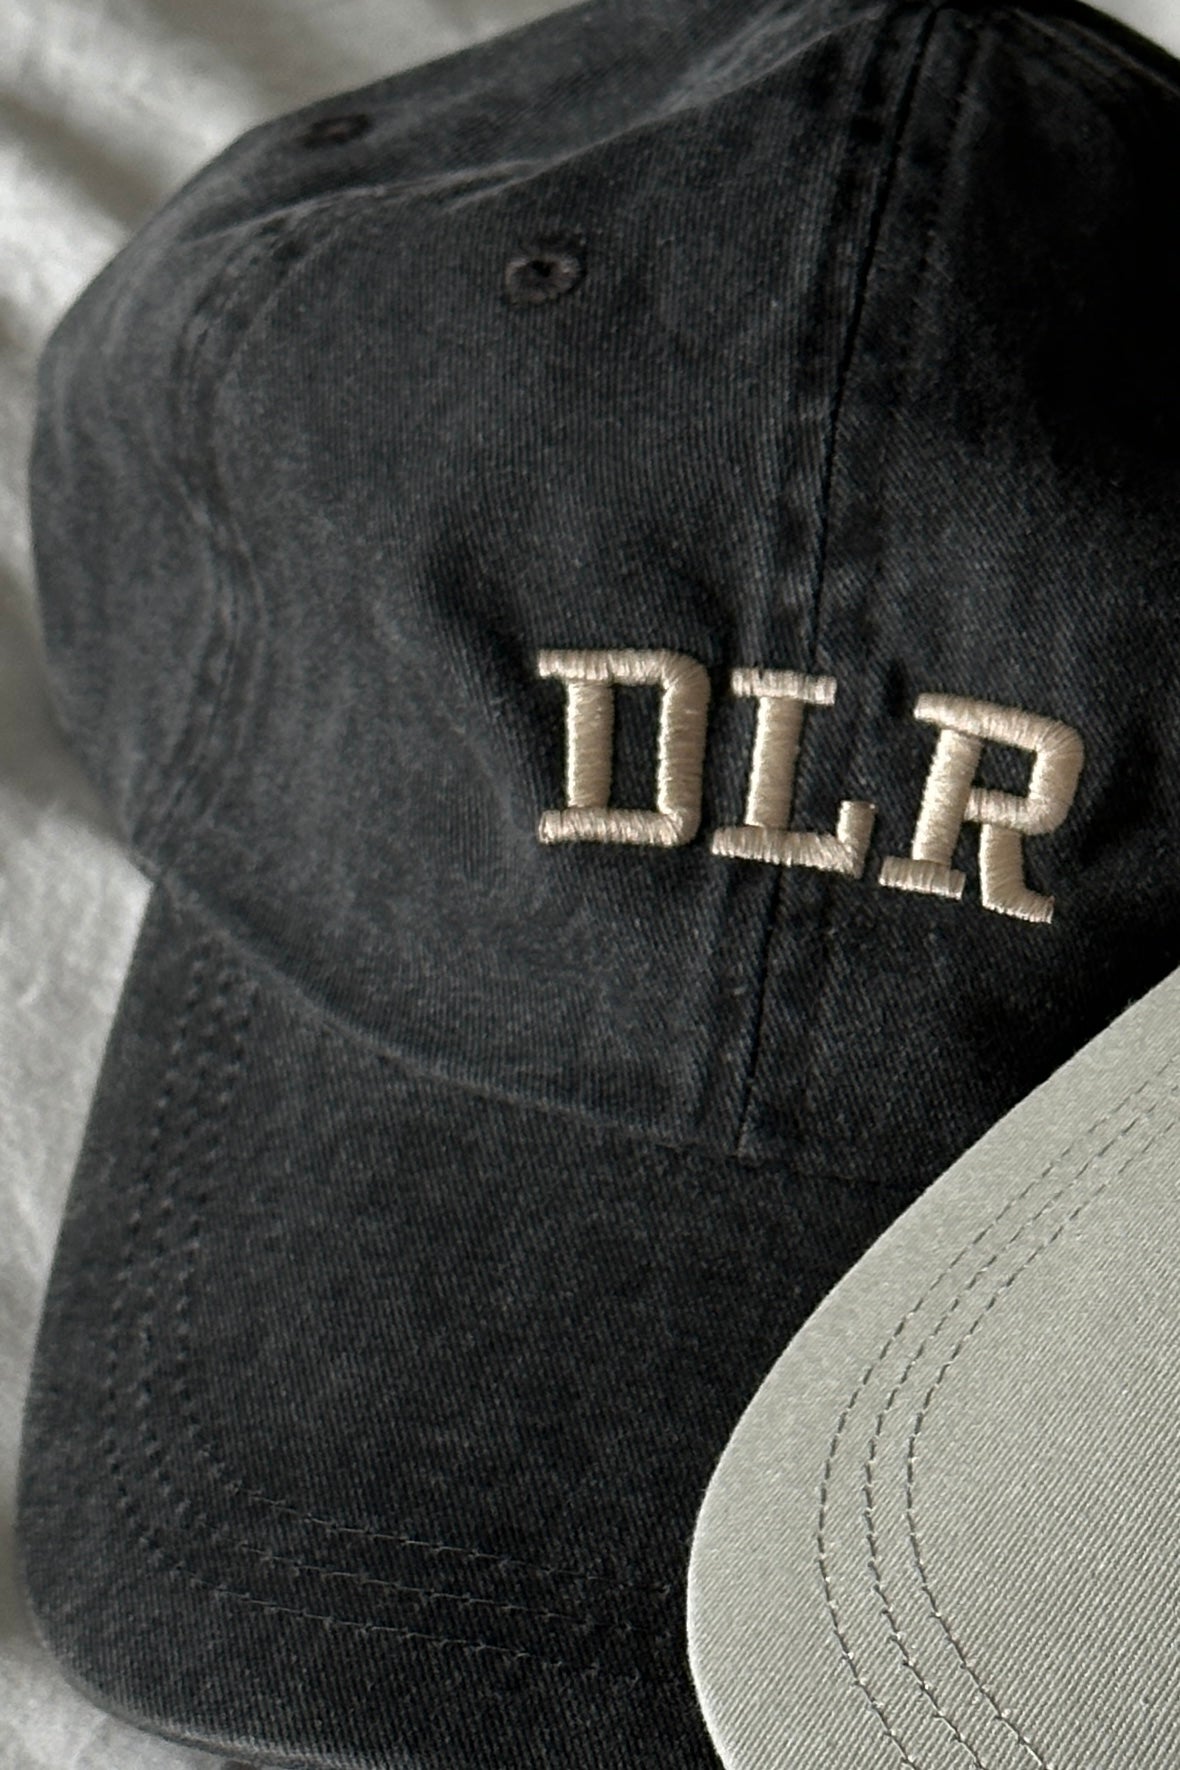 The DLR Hat (2 Colors)